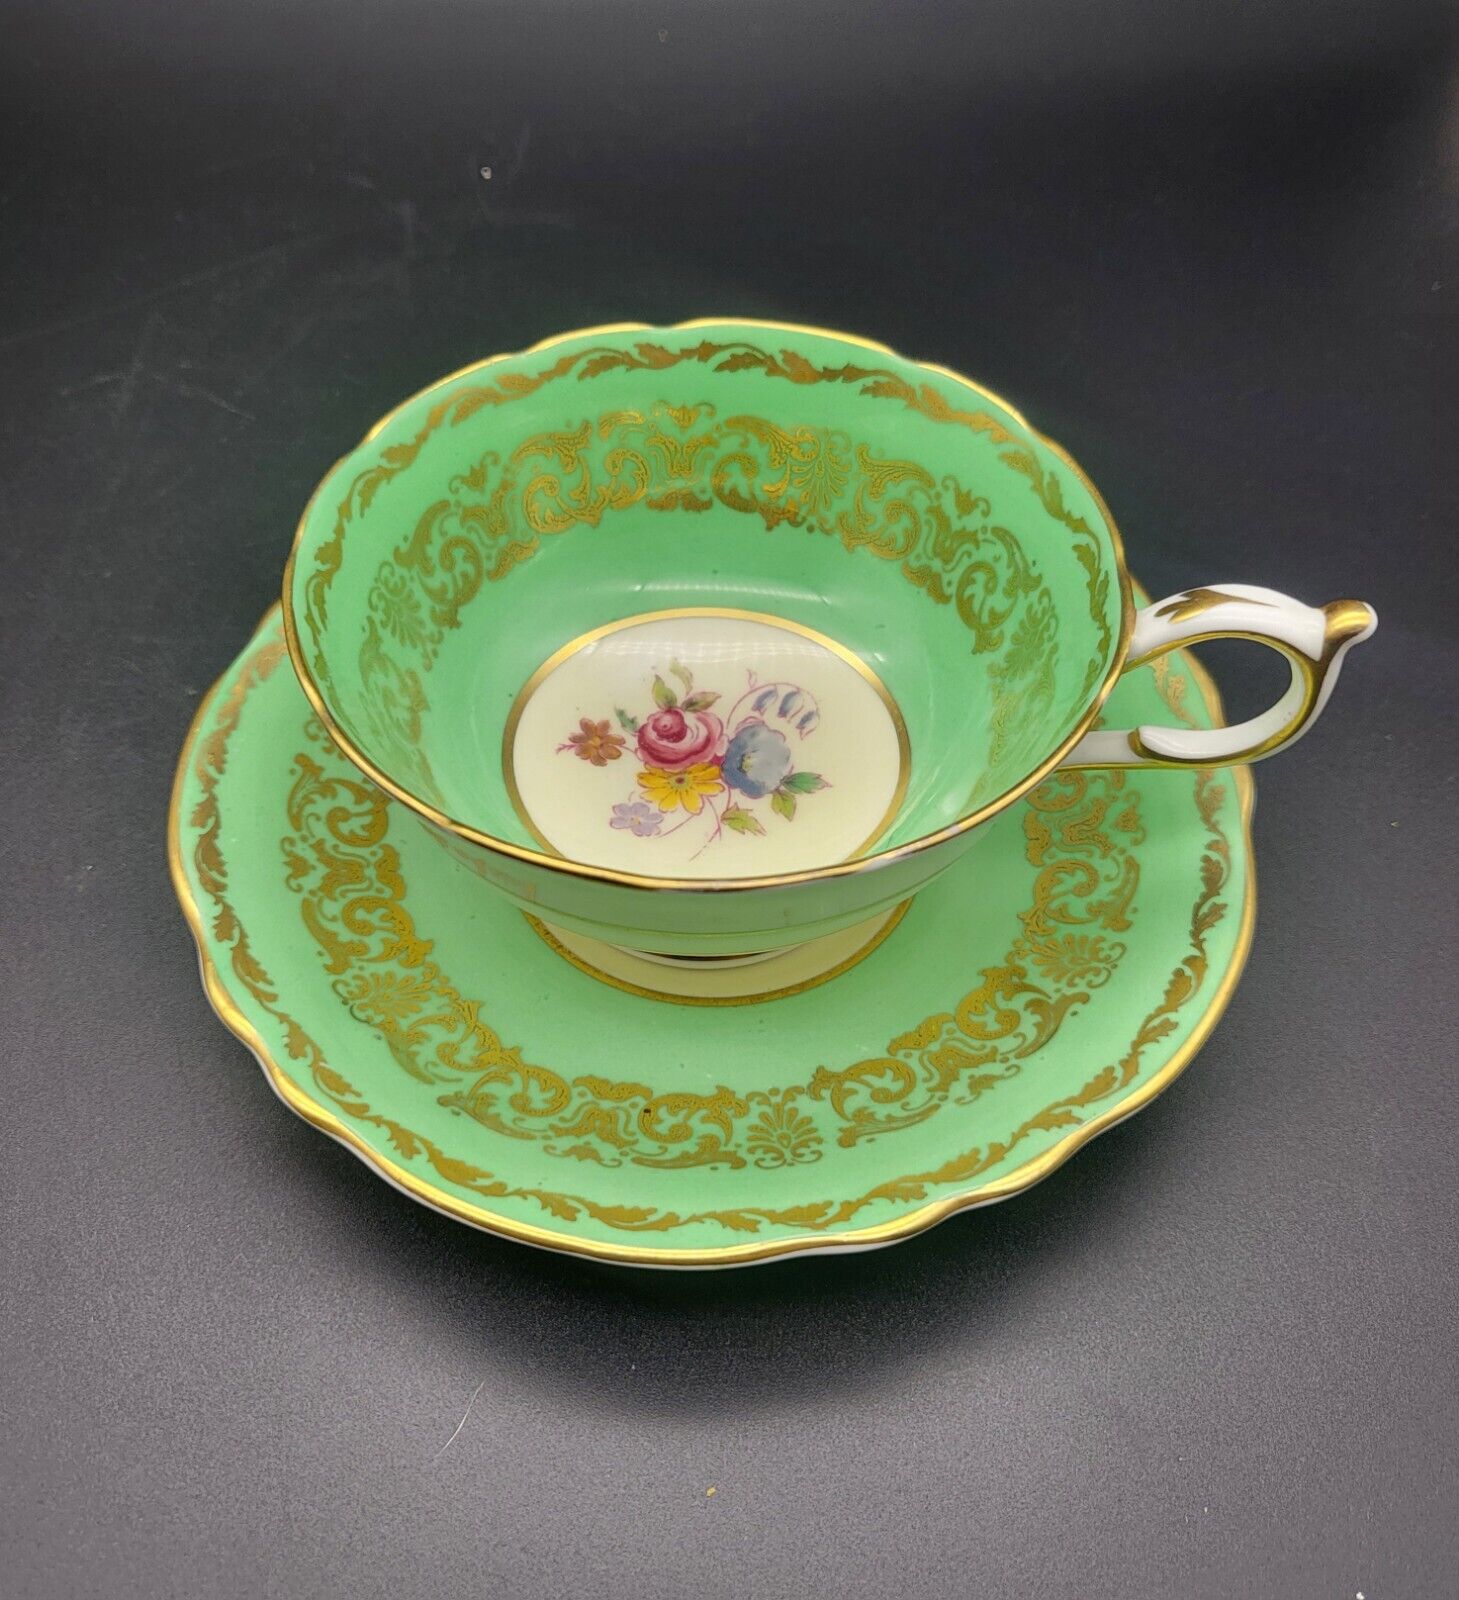 Paragon Double Warranted By Queen Mary Teacup Saucer Set  Cabbage Rose 1939 